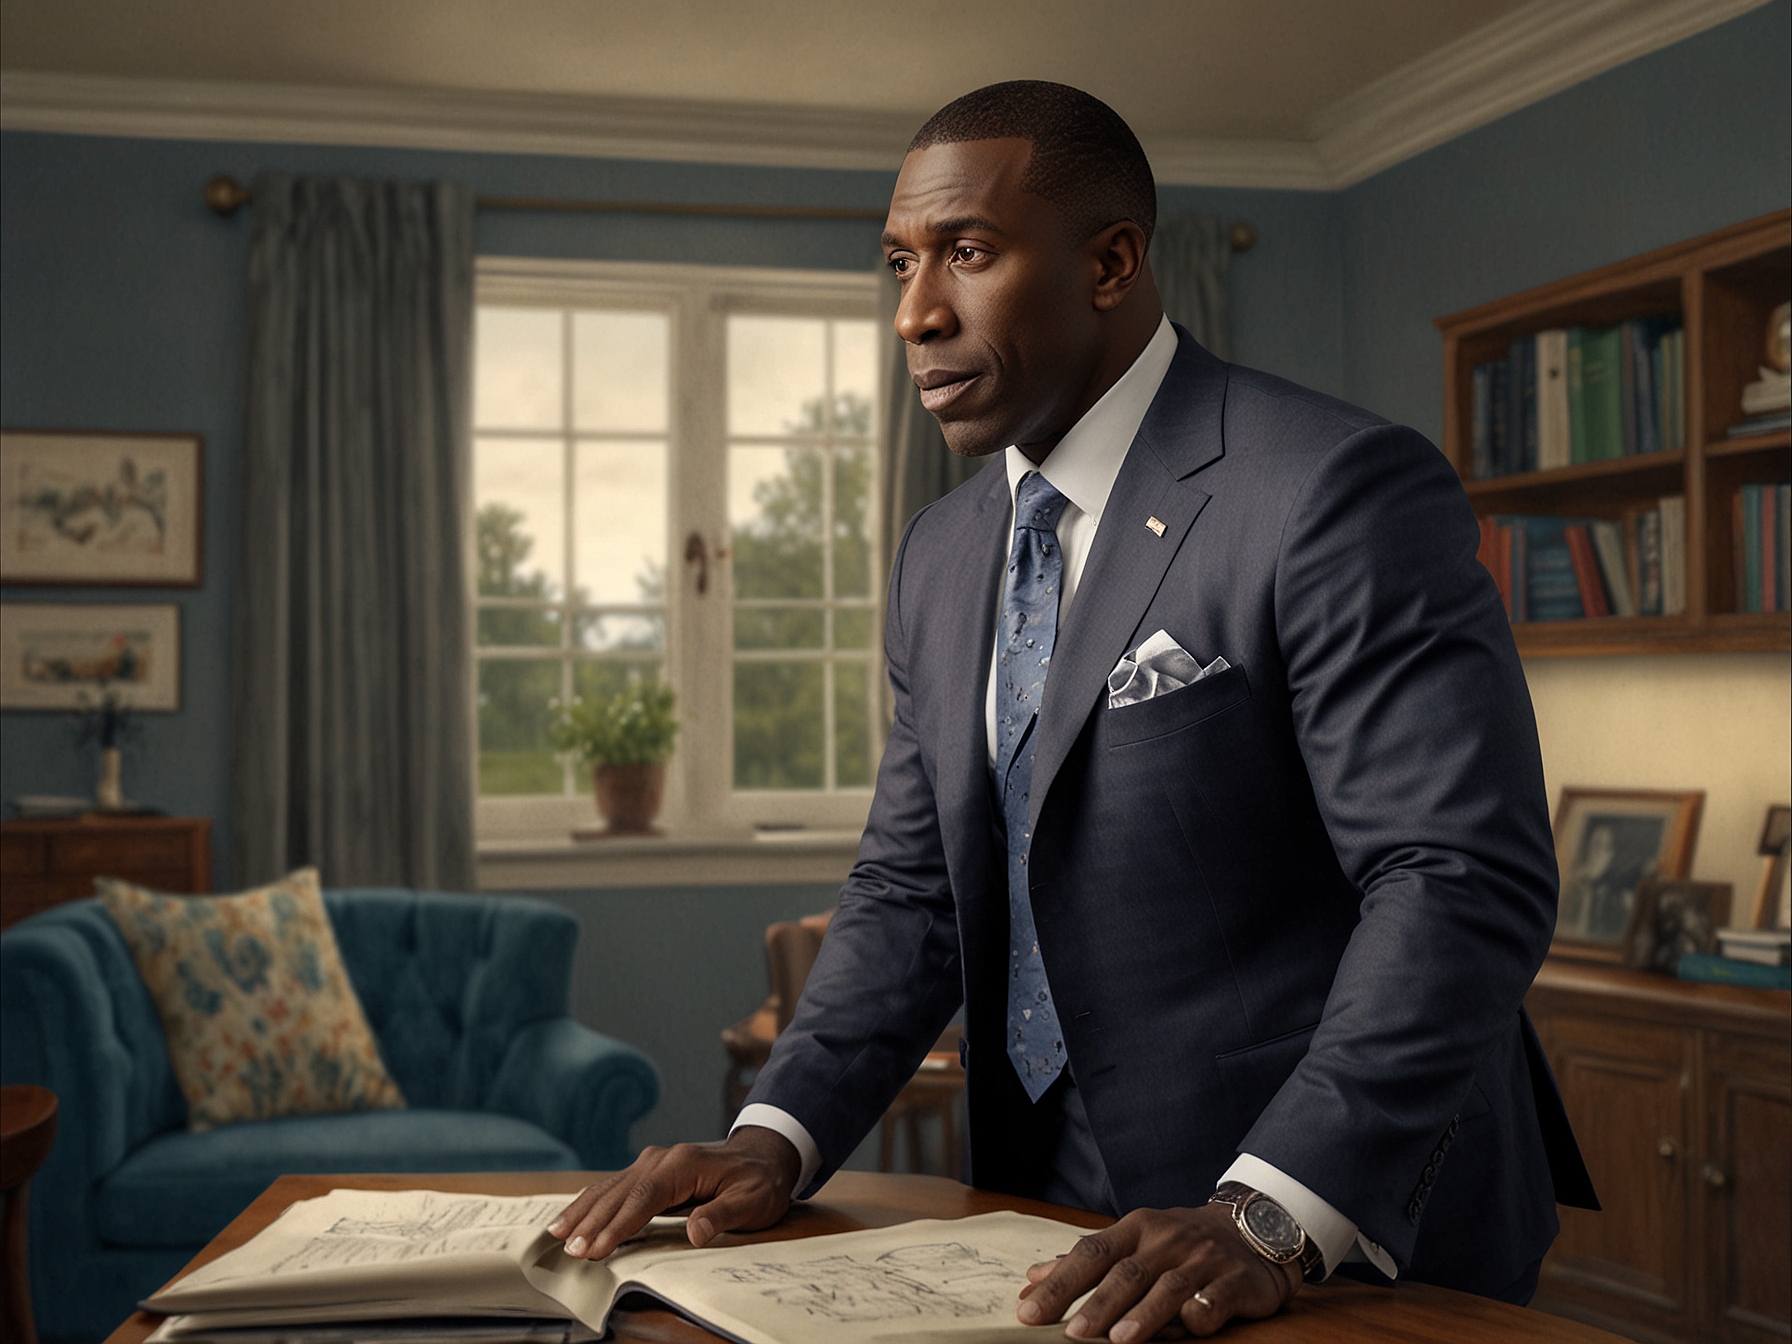 Illustration of Shannon Sharpe in action on the football field, juxtaposed with a serene, controlled home environment, representing the balance between his professional and personal life.